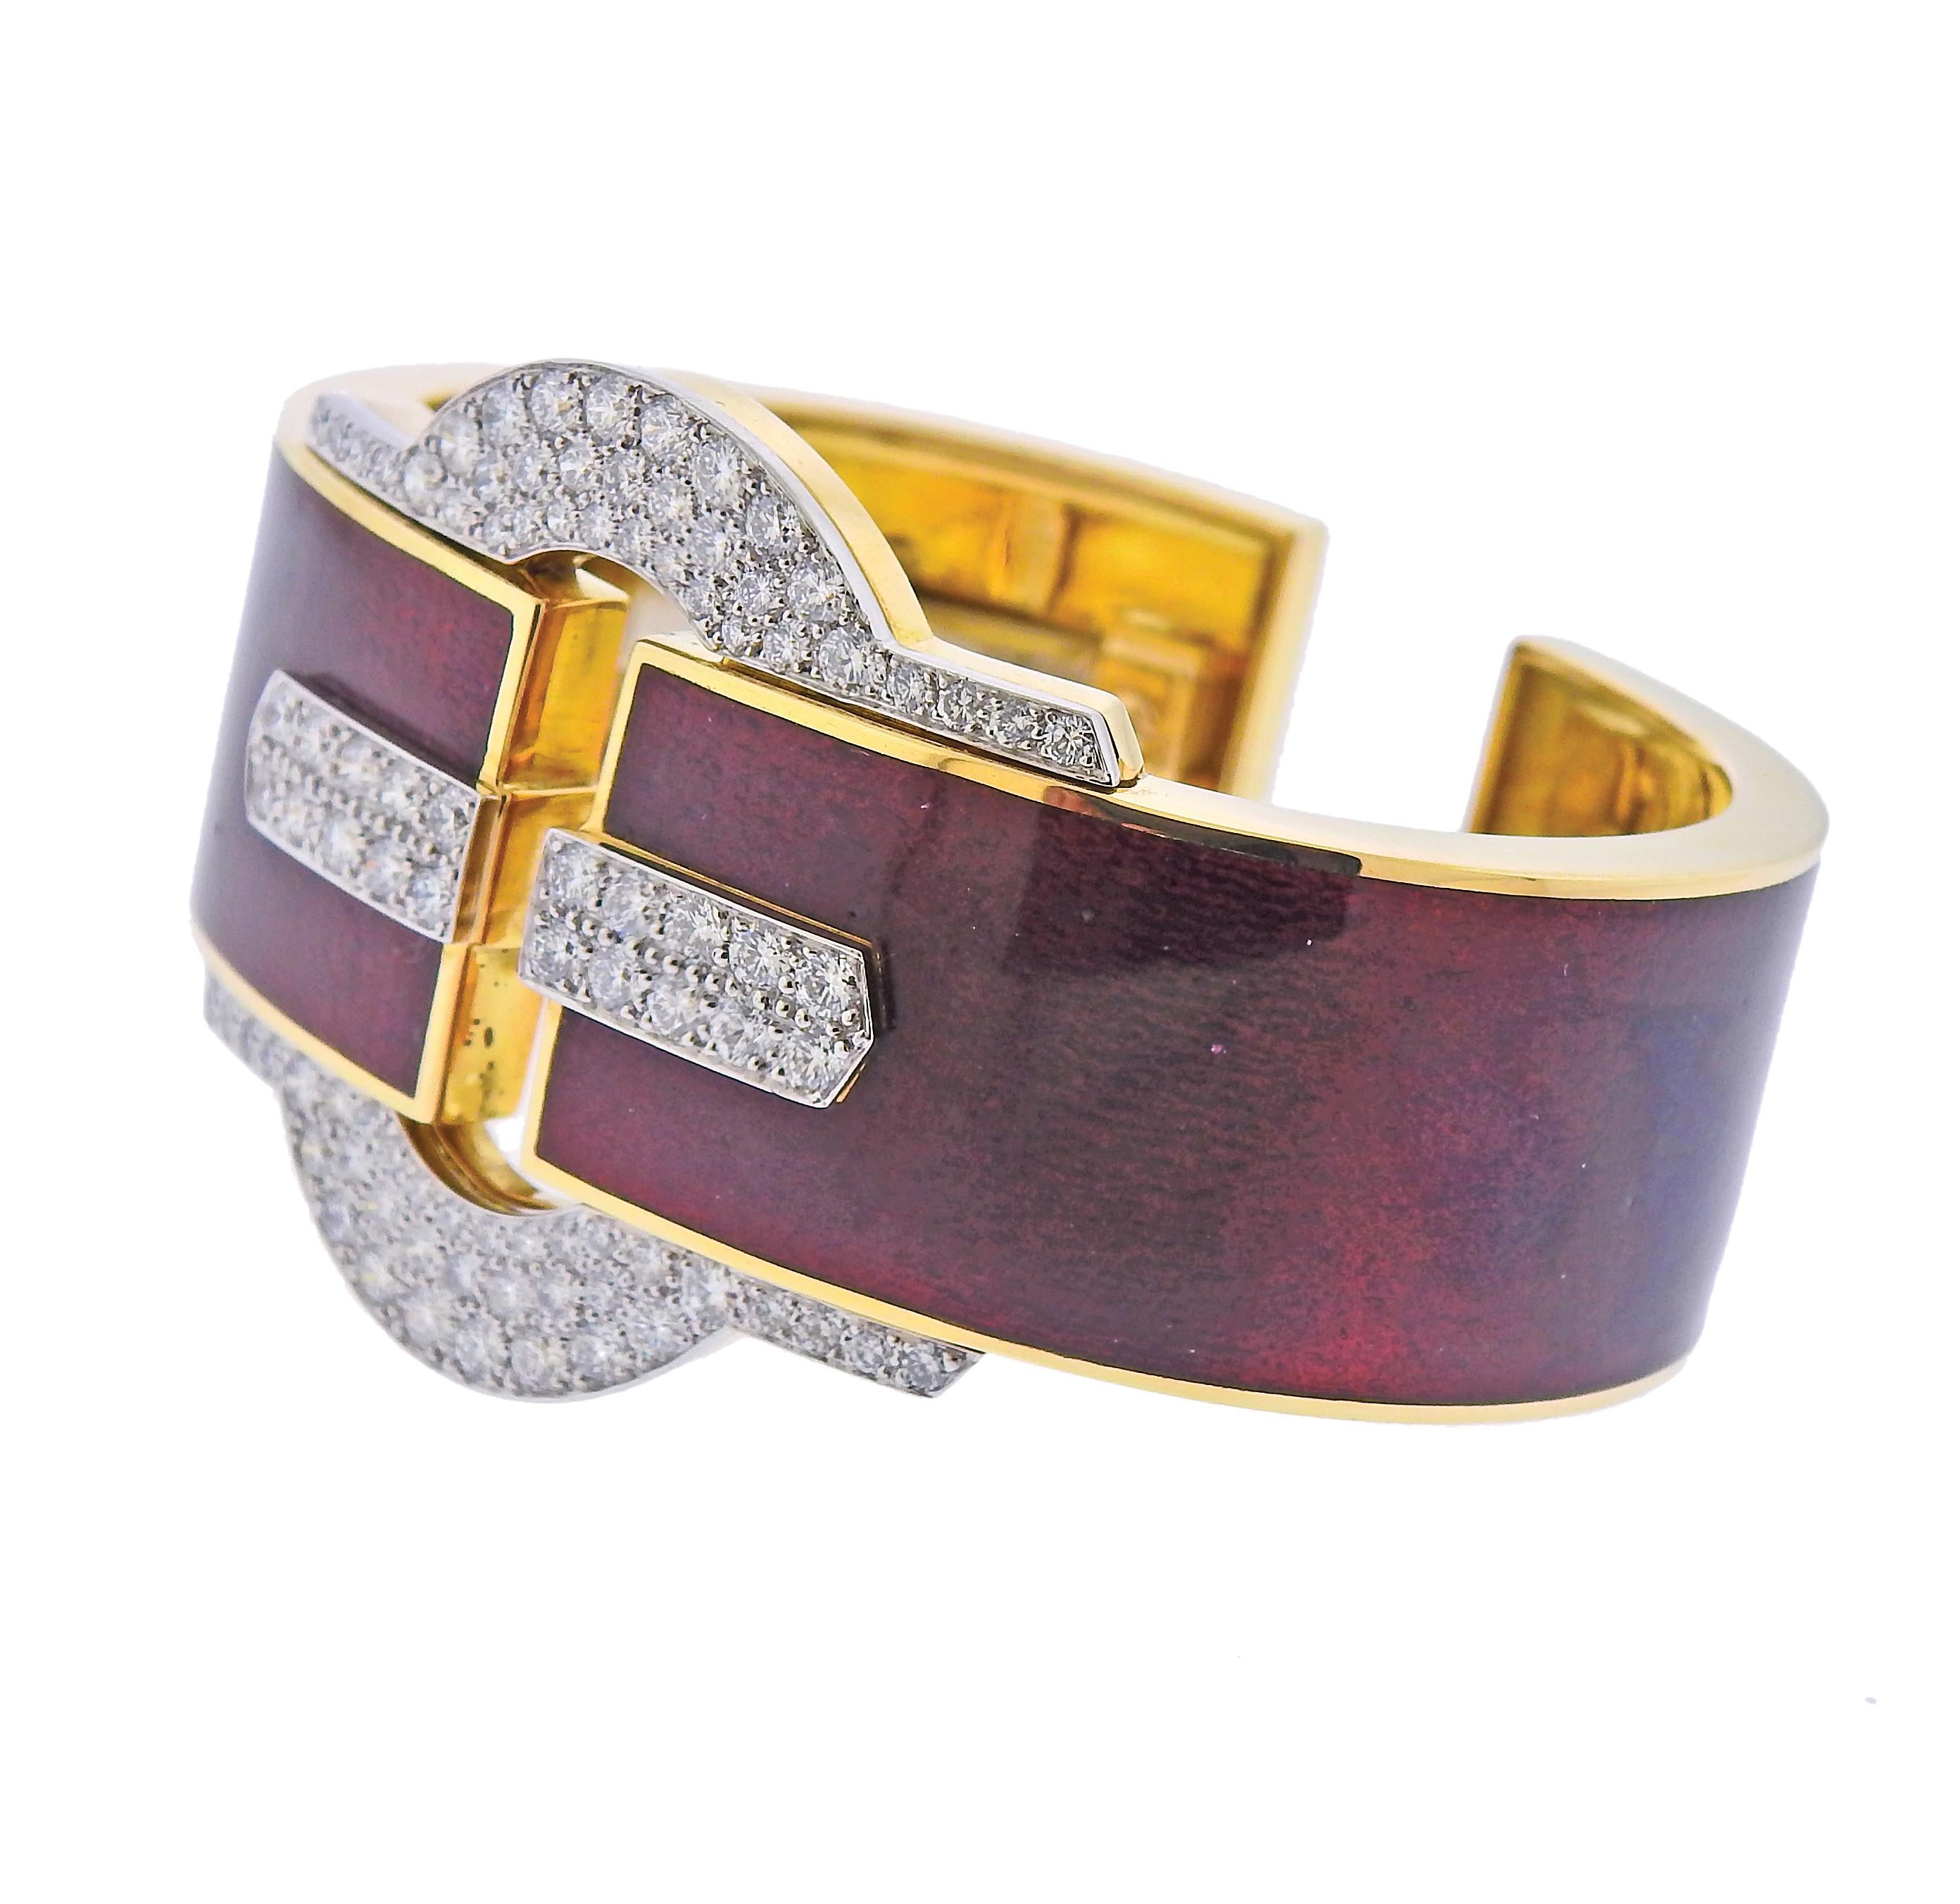 18k yellow gold and platinum red enamel cuff buckle bracelet by David Webb, with approx. 2.60cts in H/VS-SI1 diamonds. Cuff will fit approx. 6.5-6.75